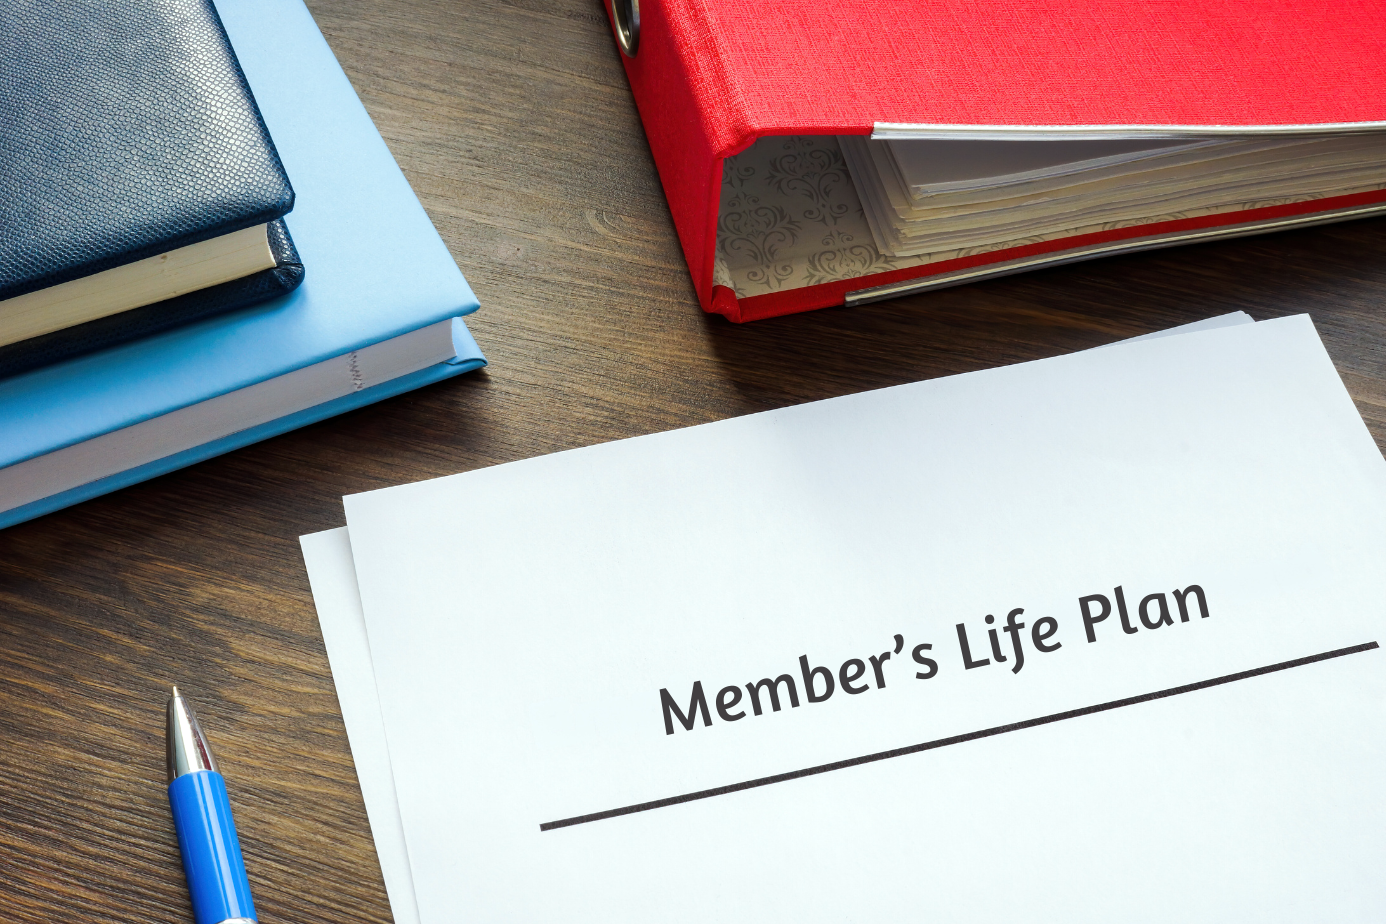 stacks of books and a pen appear need a document that reads &quot;Member&#039;s Life Plan&quot;